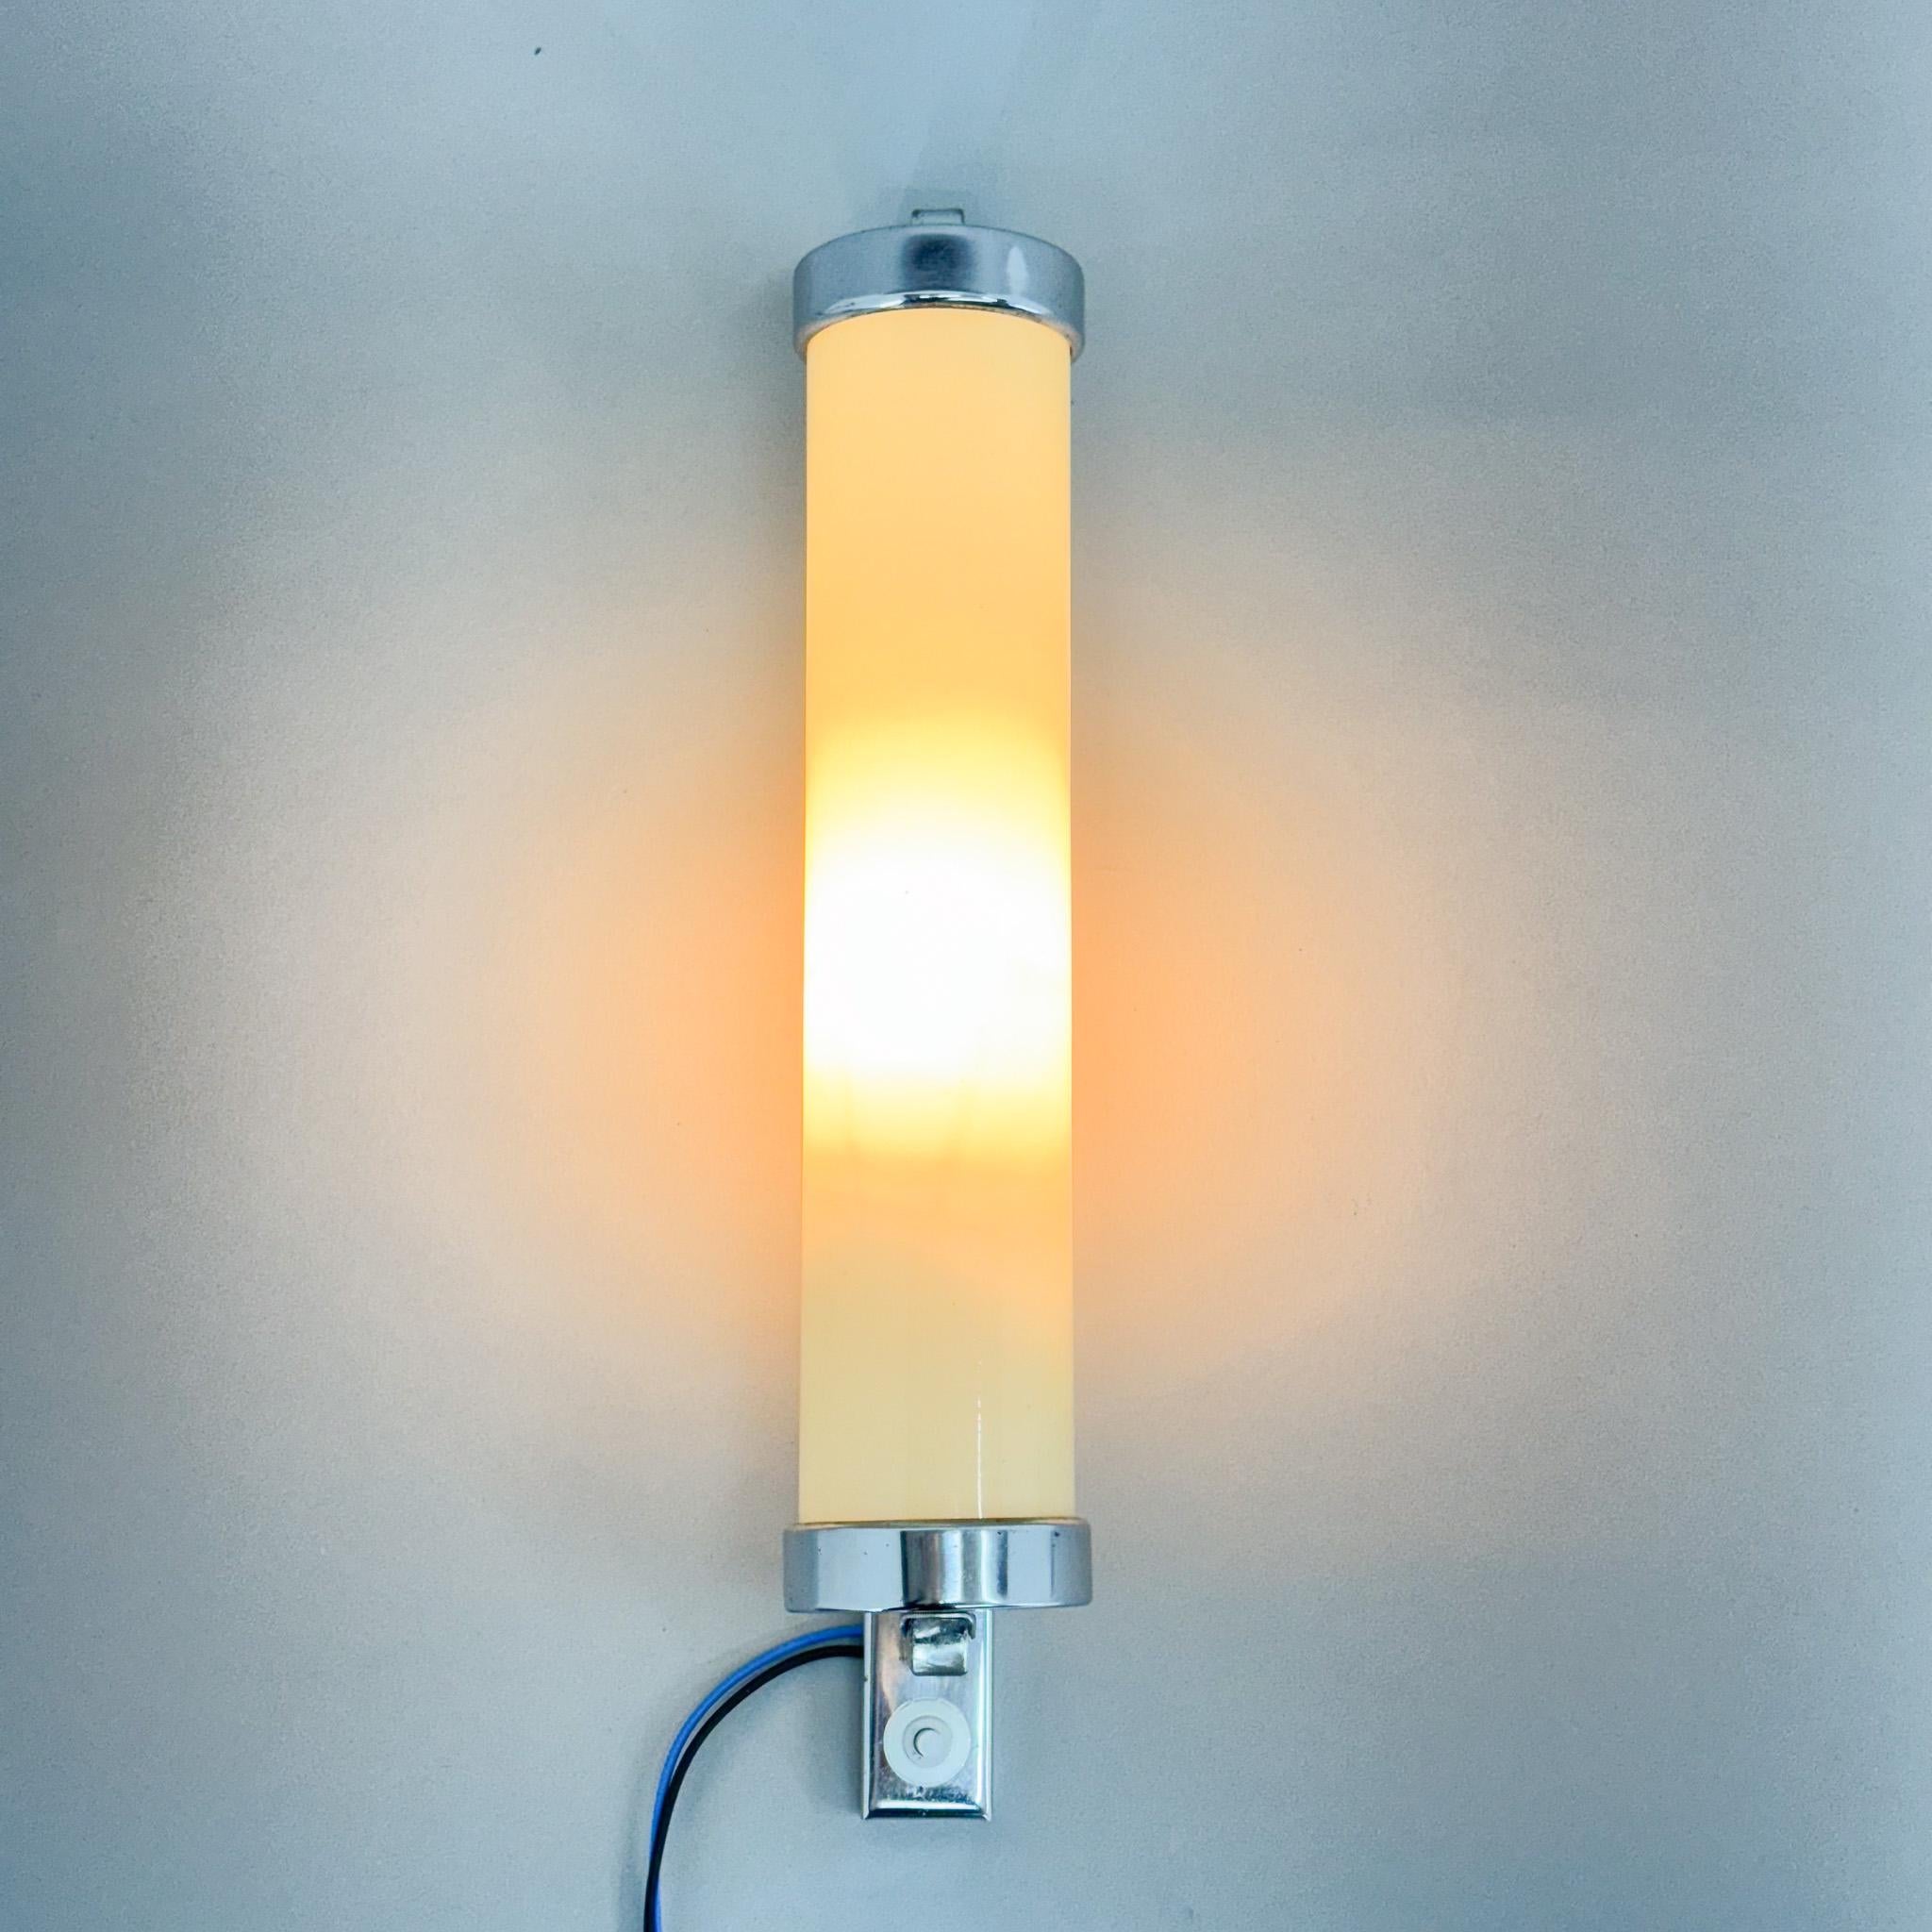 1930's Bauhaus or Functionalist Chrome Wall Lamp  For Sale 2